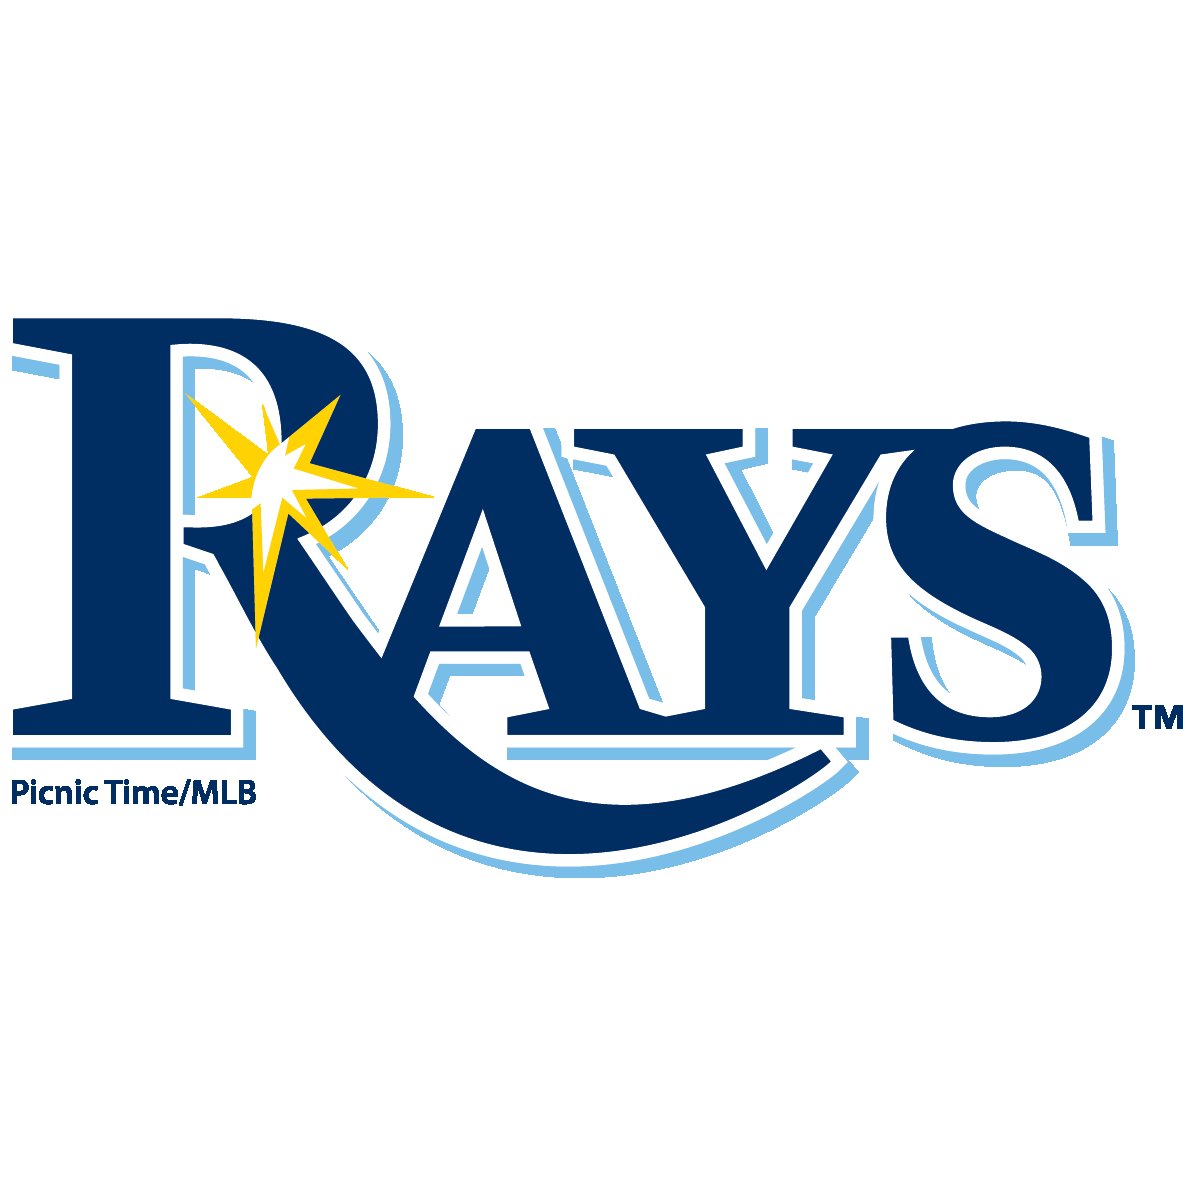 Tampa Bay Rays Stadium Clear Tote